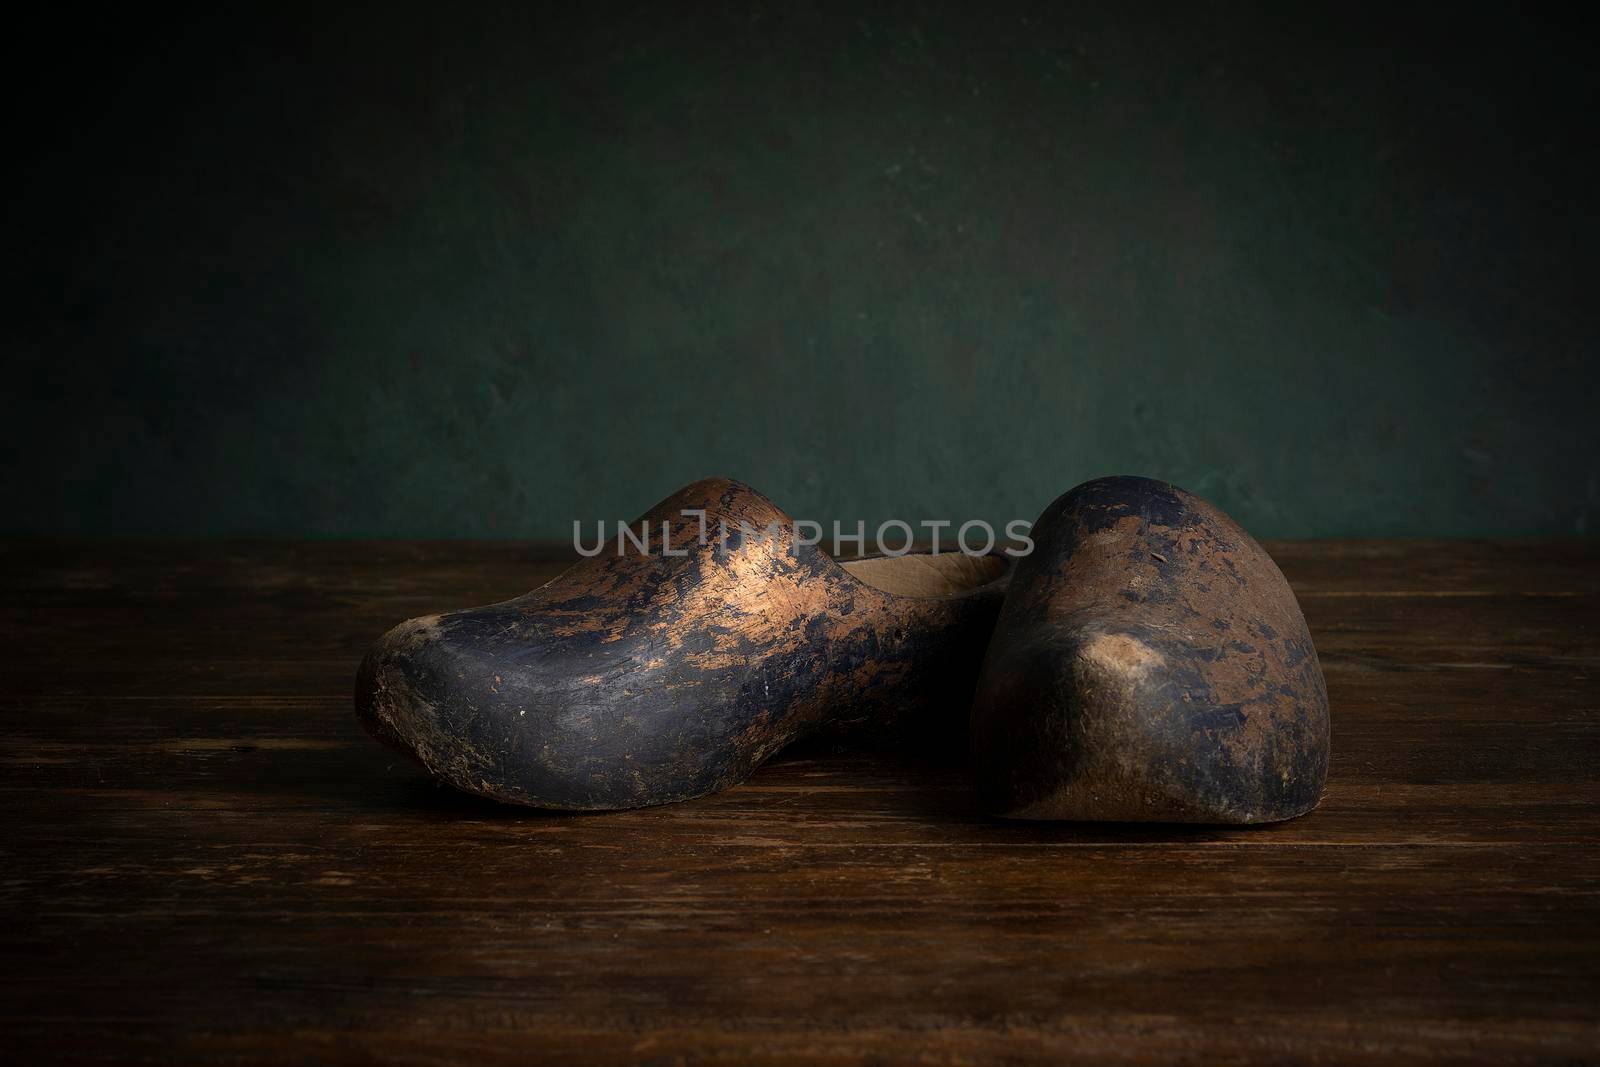 A pair of clogs or wooden shoes typical for the Dutch culture in a stillife setting, Holland or The Netherlands by LeoniekvanderVliet